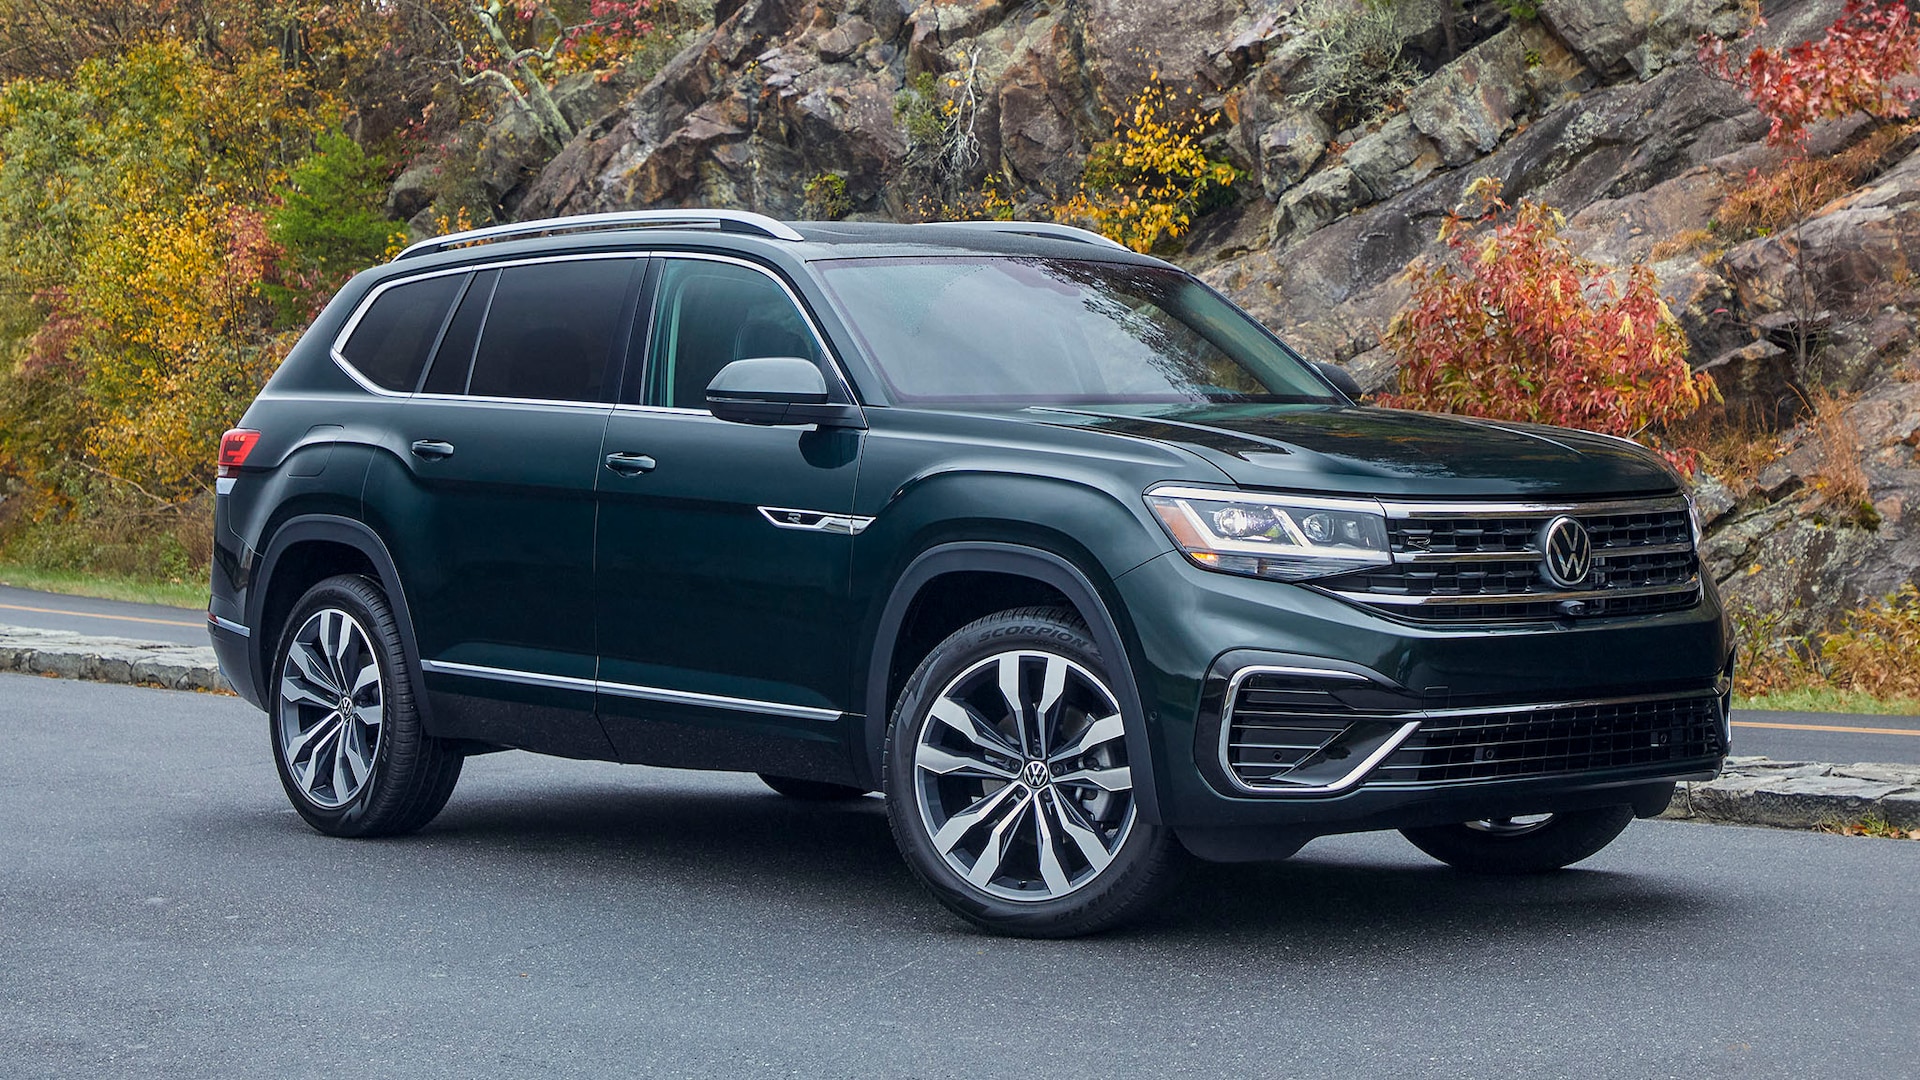 2023 Volkswagen Atlas Prices, Reviews, and Photos - MotorTrend